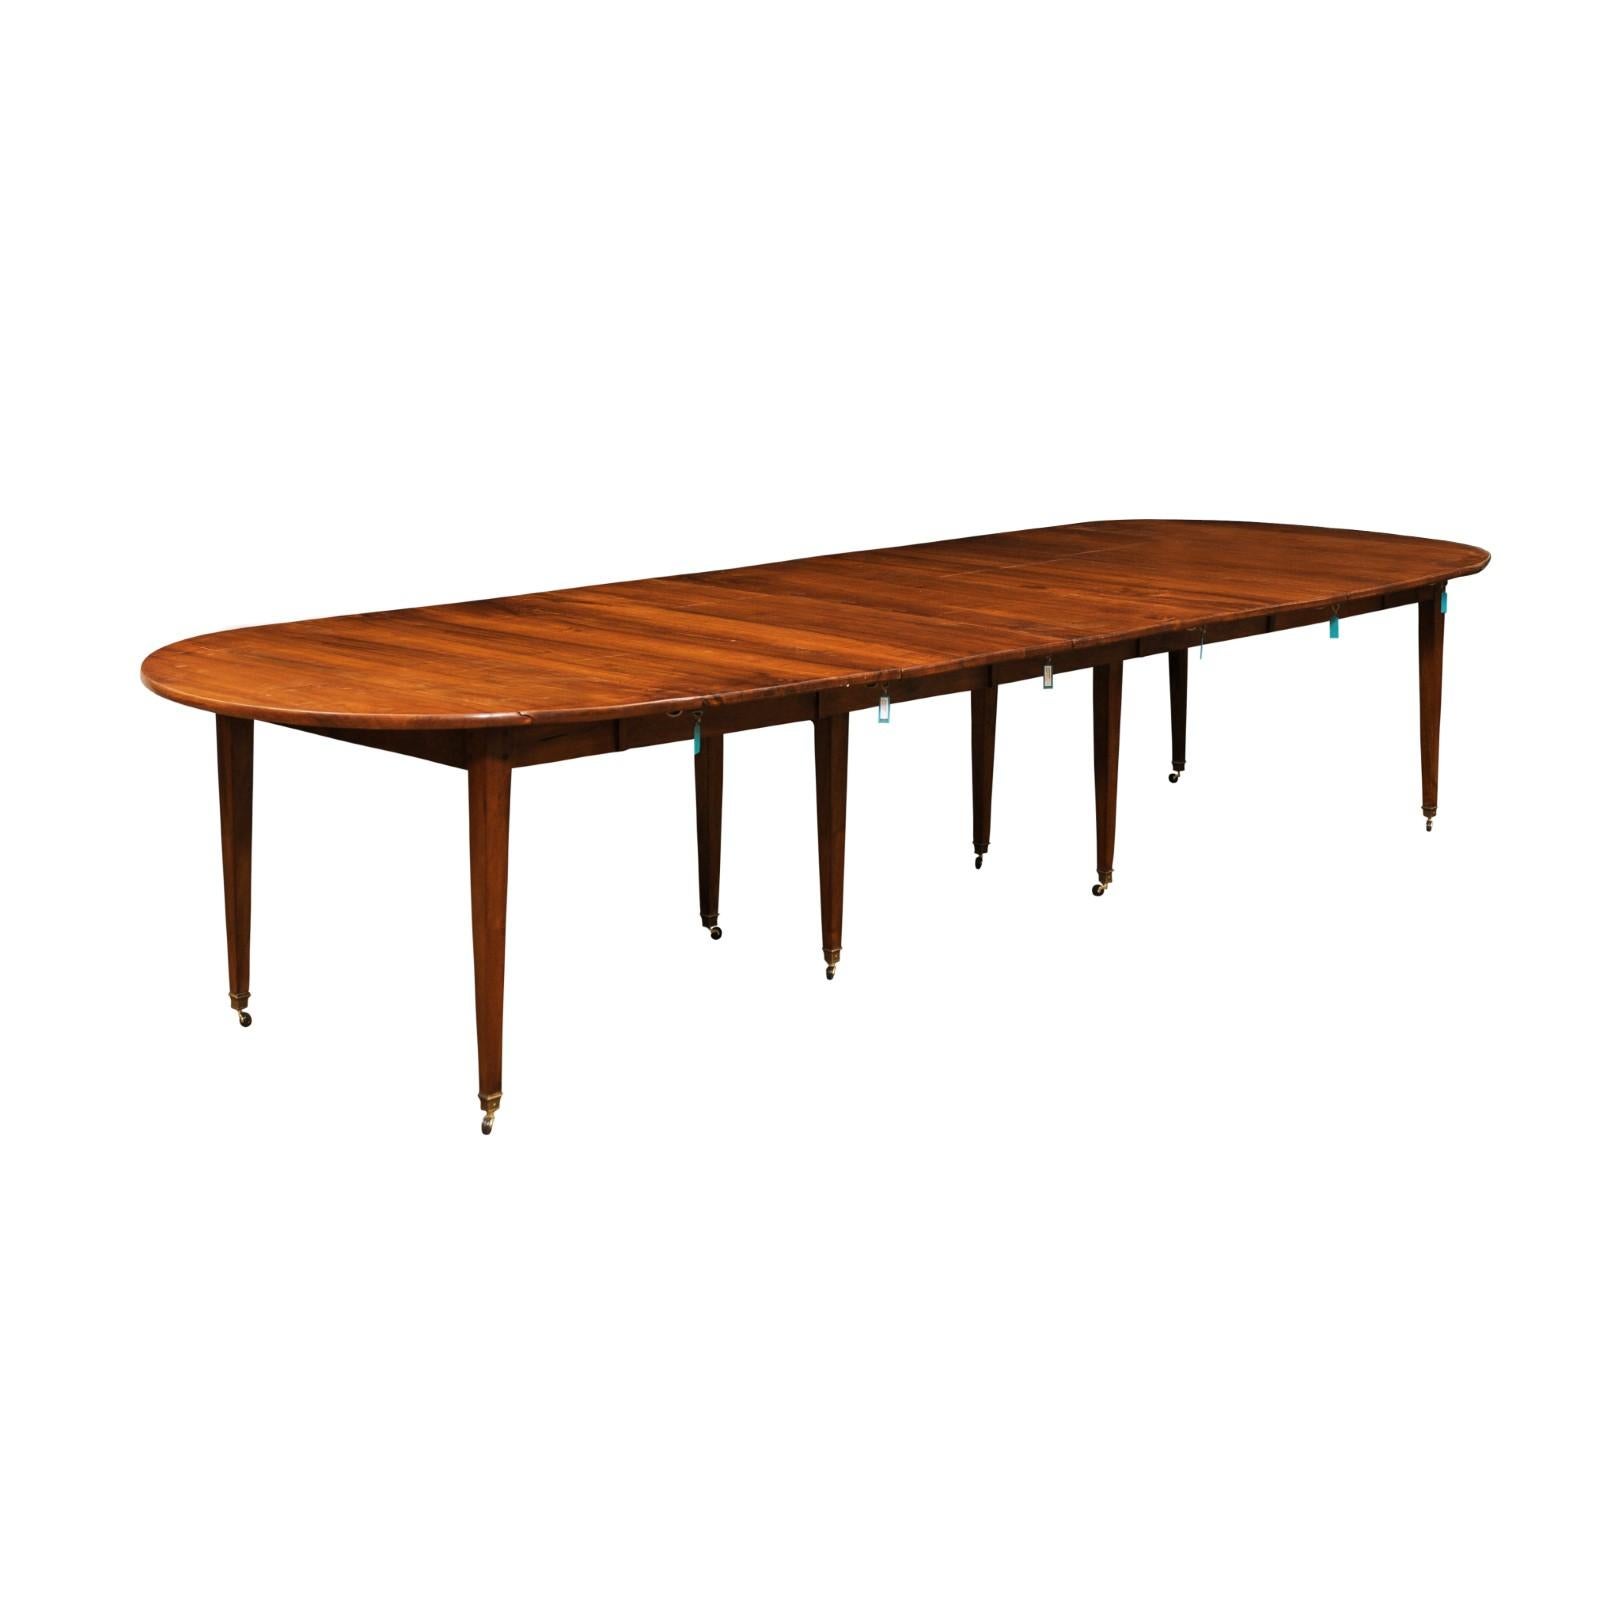 A French walnut oval extension dining room table from the 19th century, with five leaves, tapered legs and casters. Created in France during the 19th century, this French dining room table features a walnut oval top showcasing lateral drop leaves